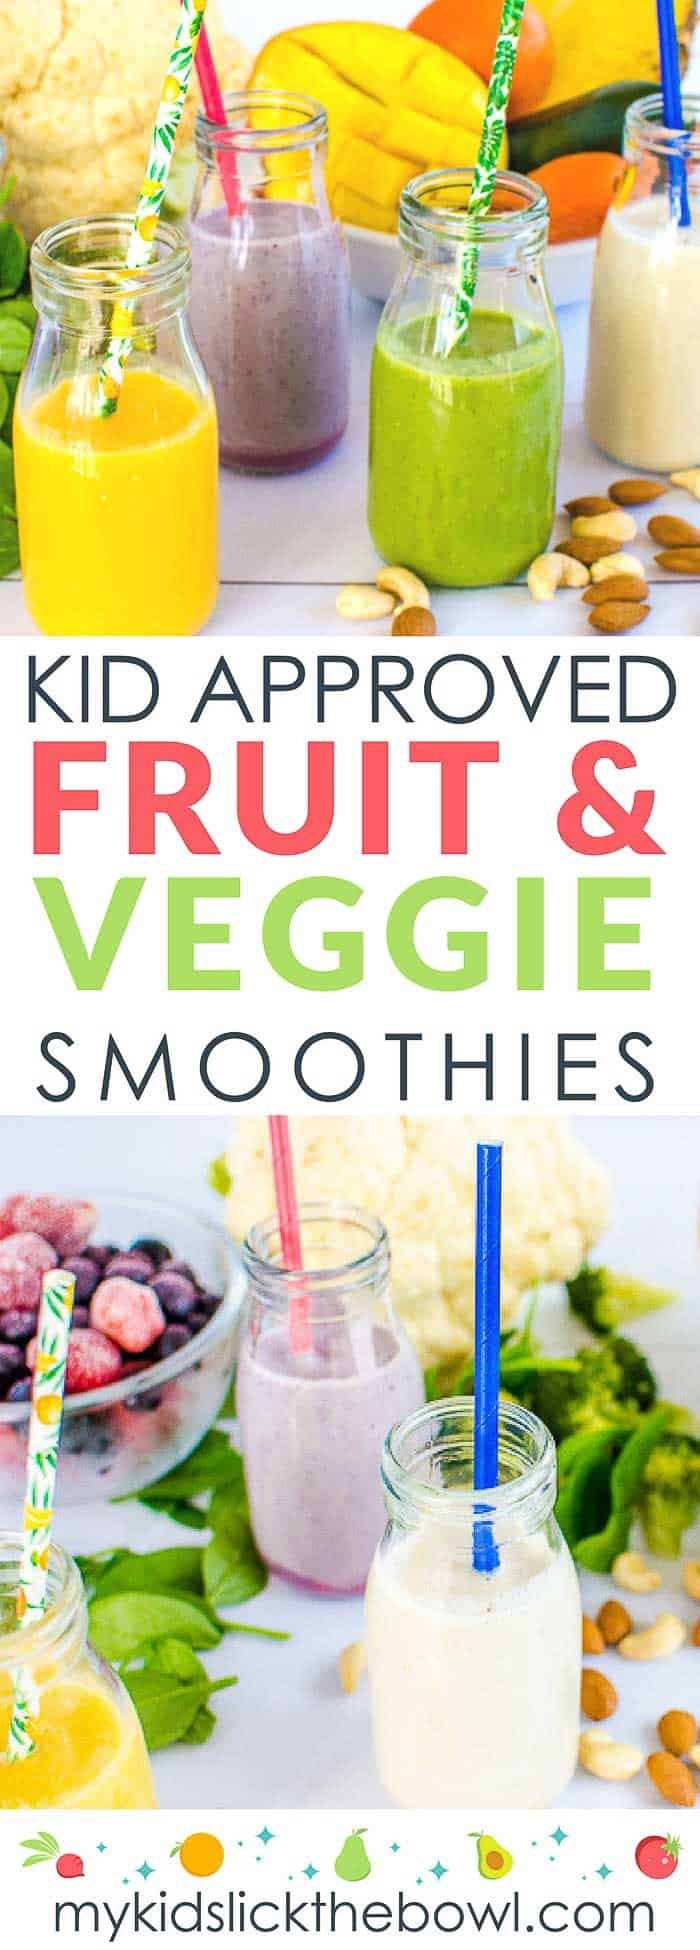 Veggie Fruit Smoothie Recipes
 fruit and ve able smoothie recipes